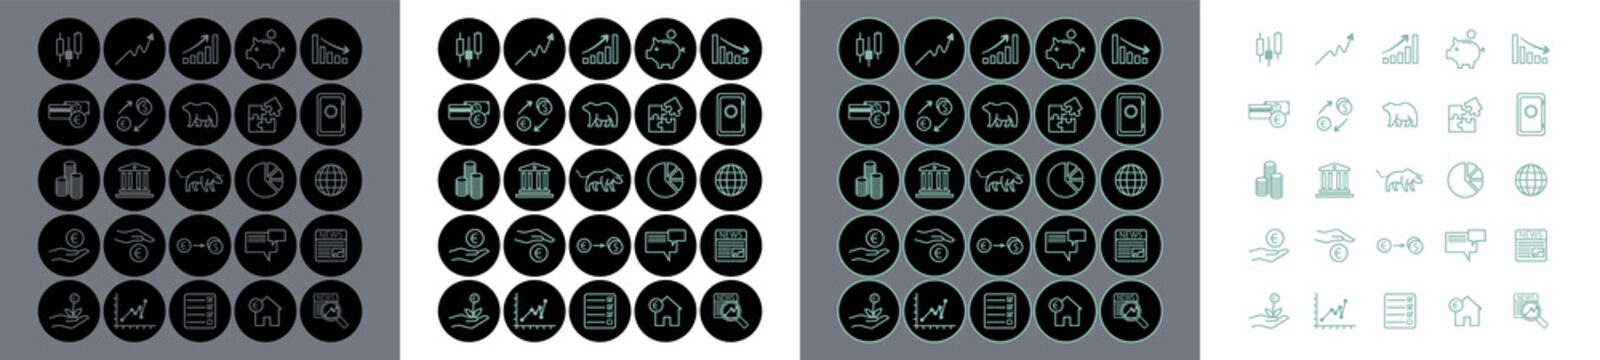 collection of 25 color customizable finance and stock exchange icon in four different variations